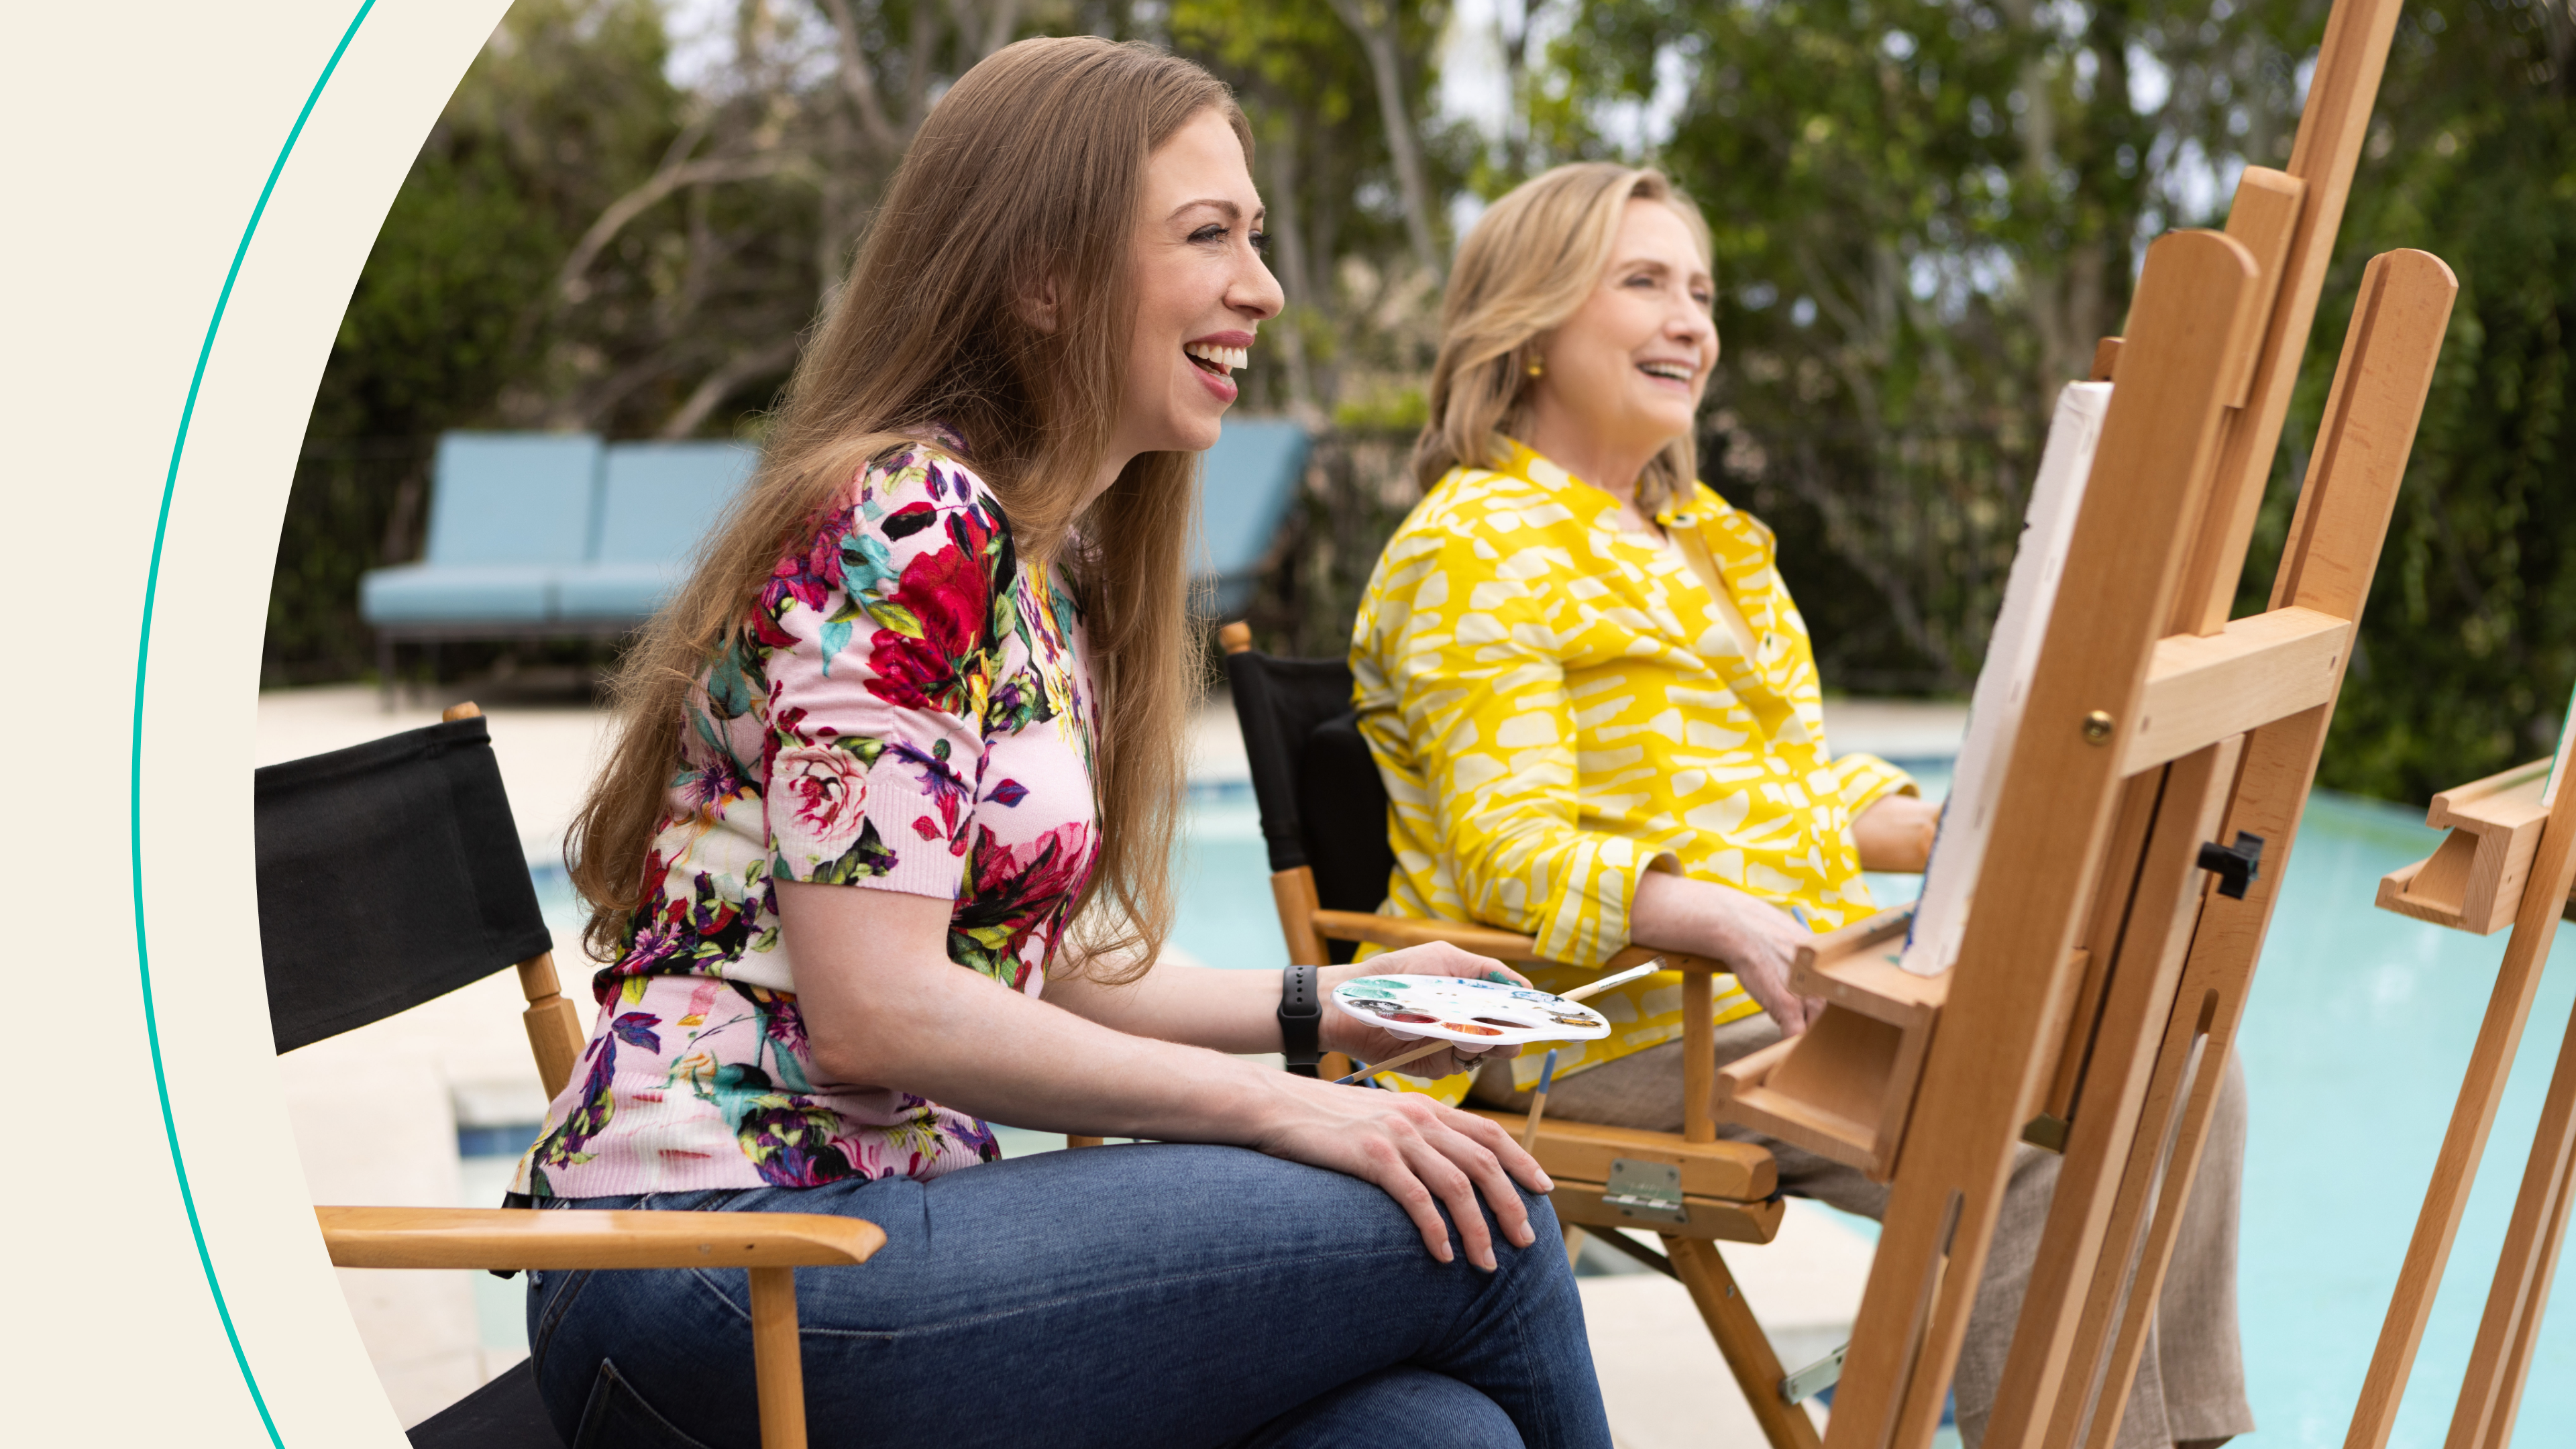 Chelsea (left) and Hillary Clinton filming "Gutsy" for Apple TV